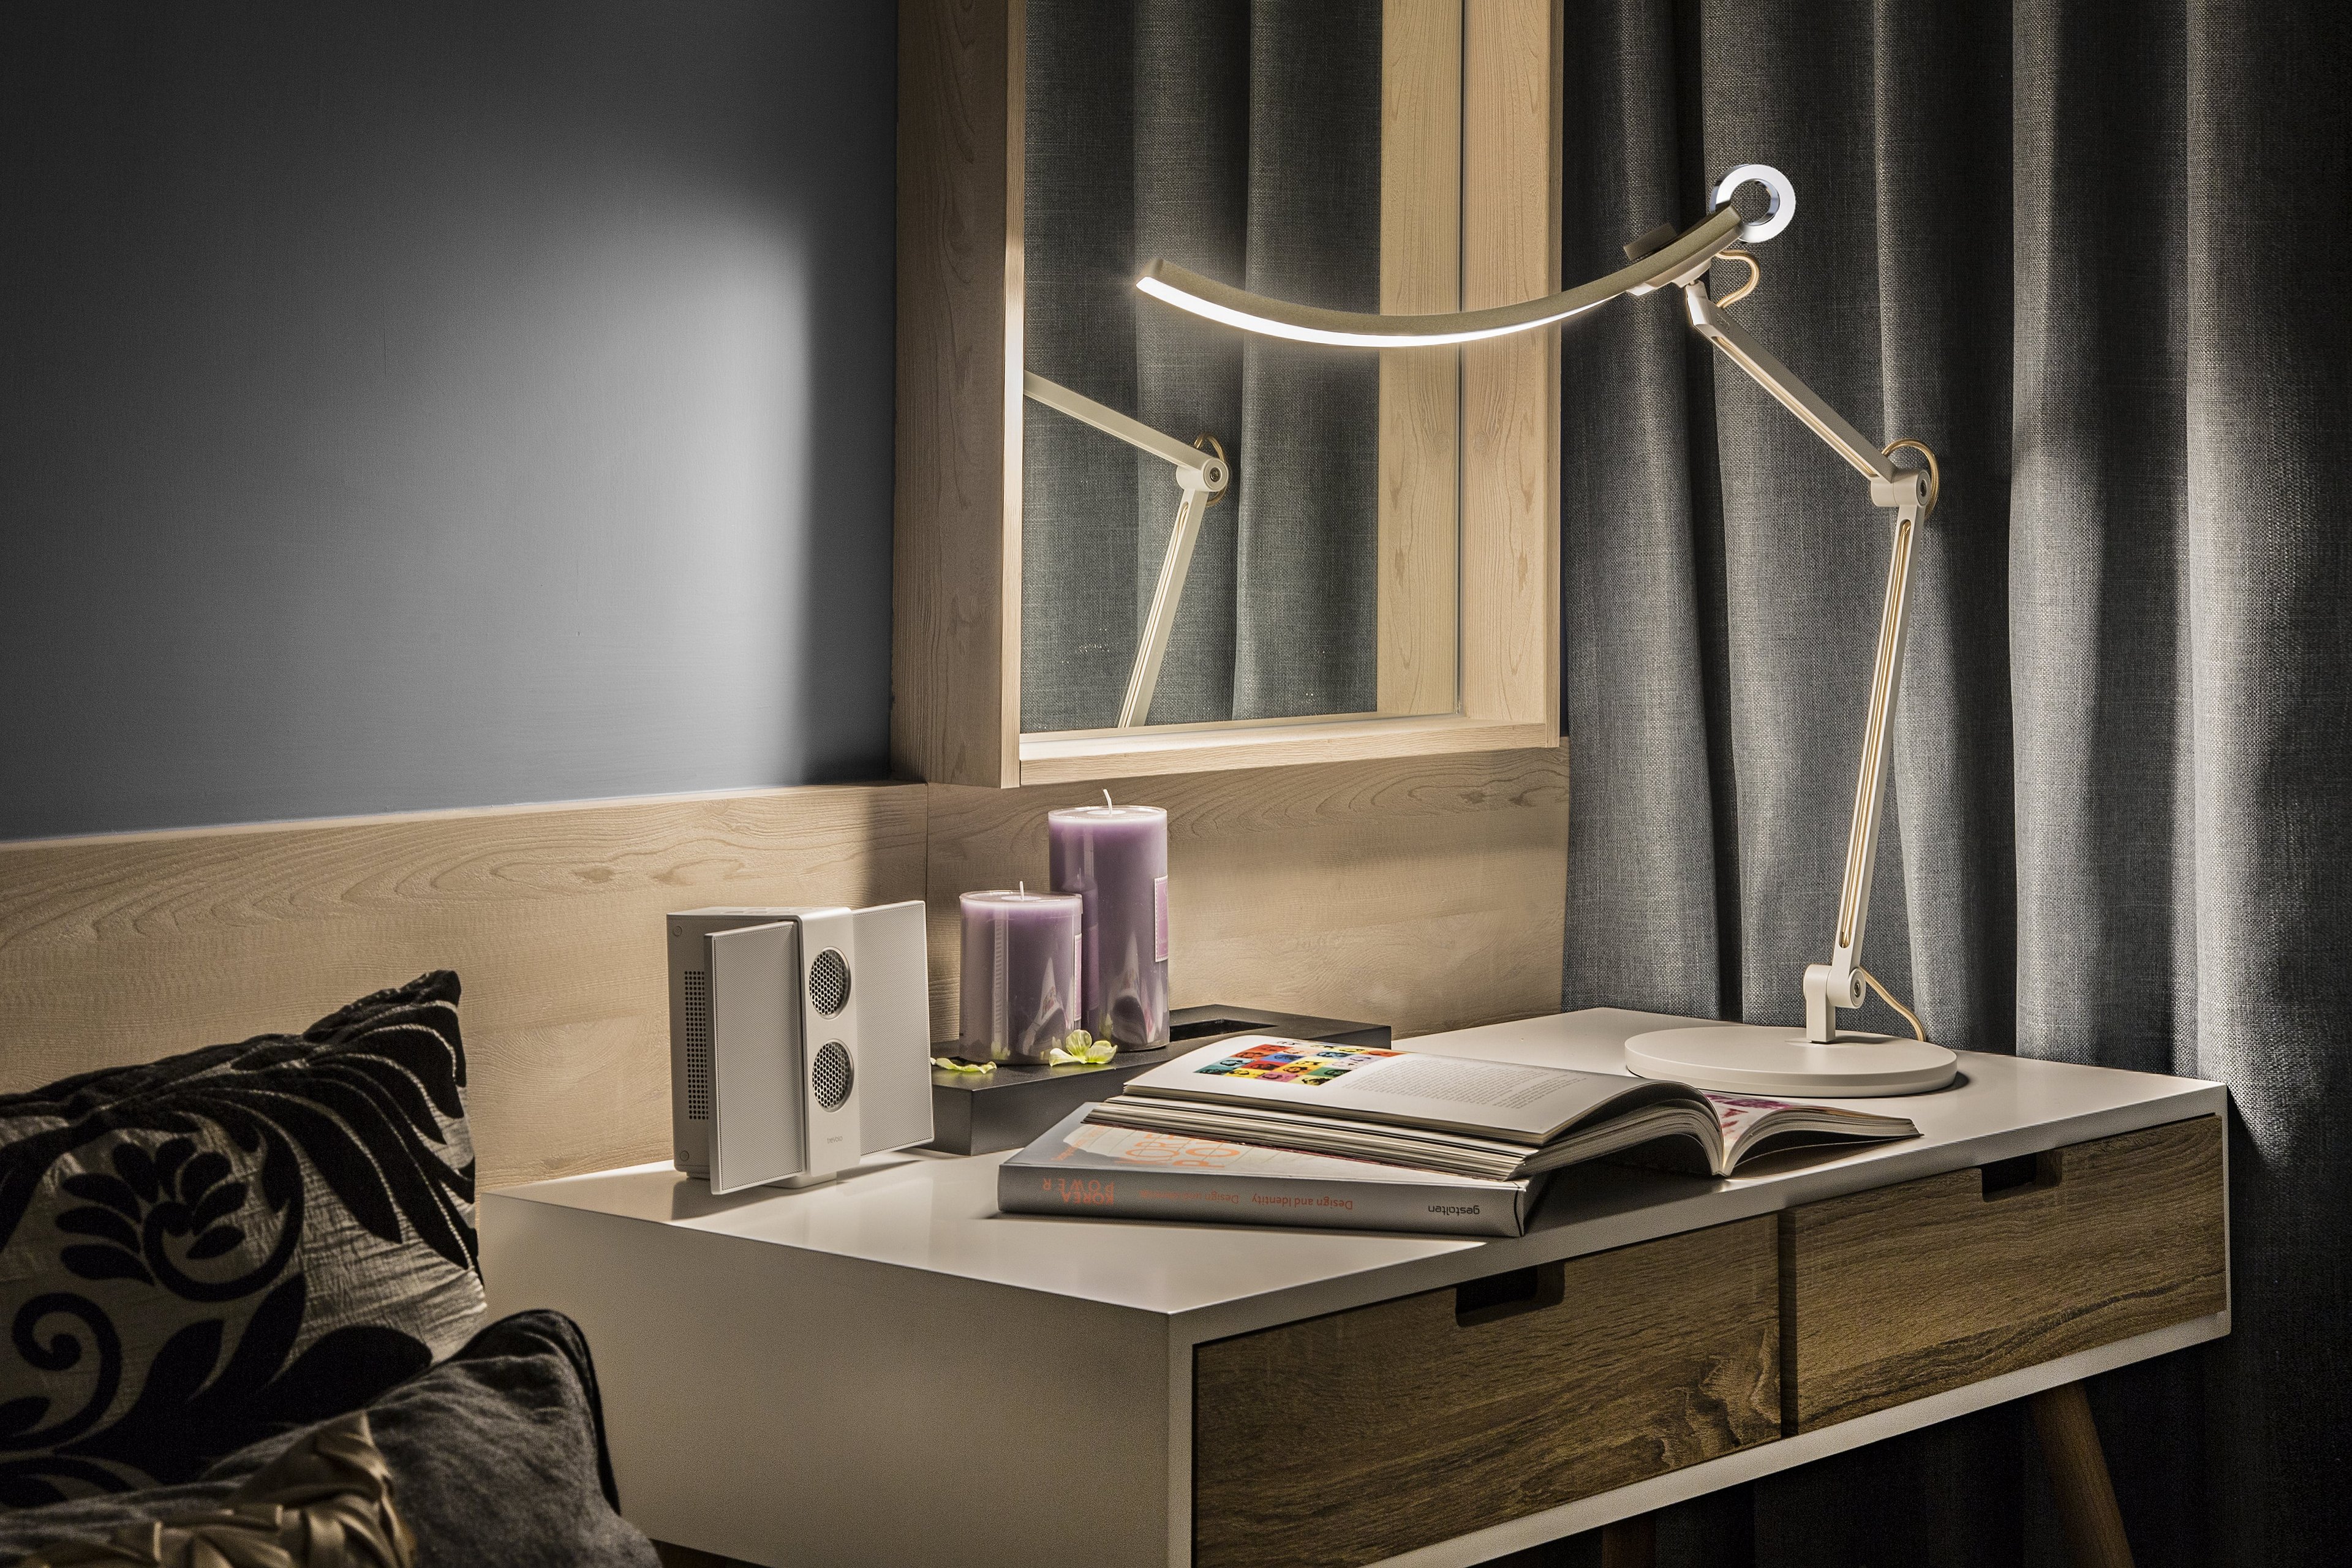 BenQ e-Reading Desk Lamp is the best choice when it comes to building circadian lighting.